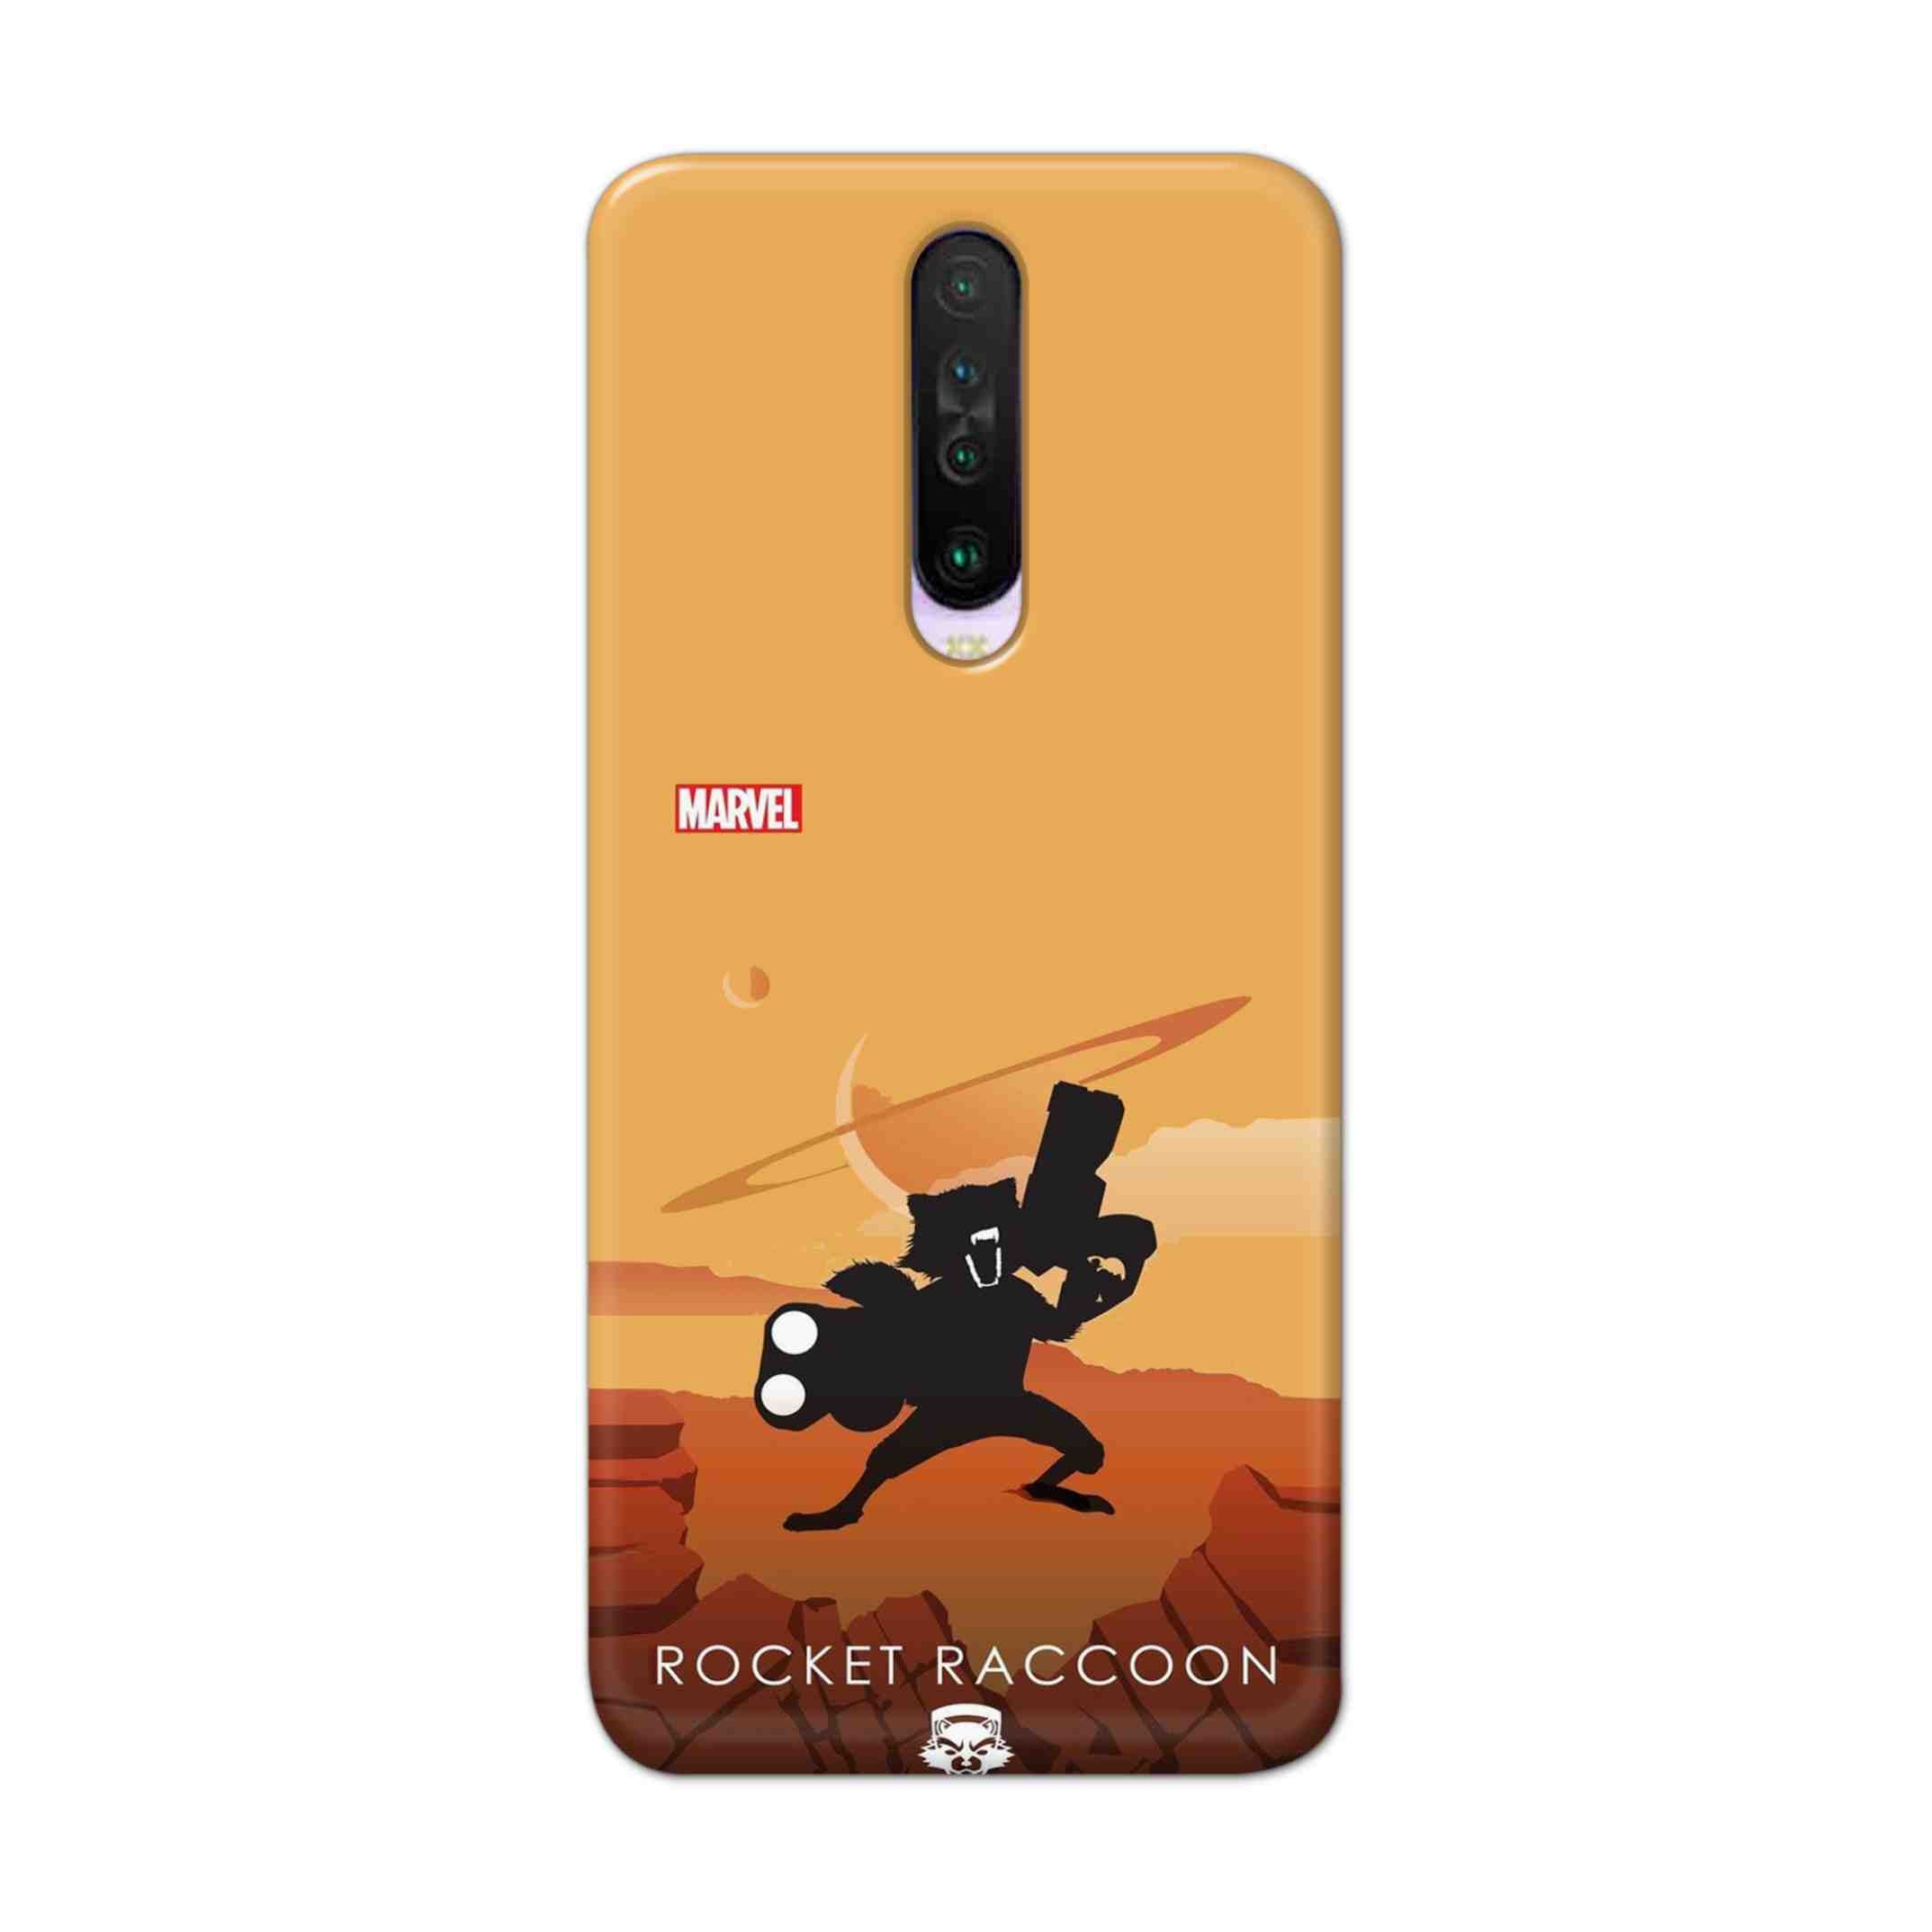 Buy Rocket Raccoon Hard Back Mobile Phone Case Cover For Poco X2 Online